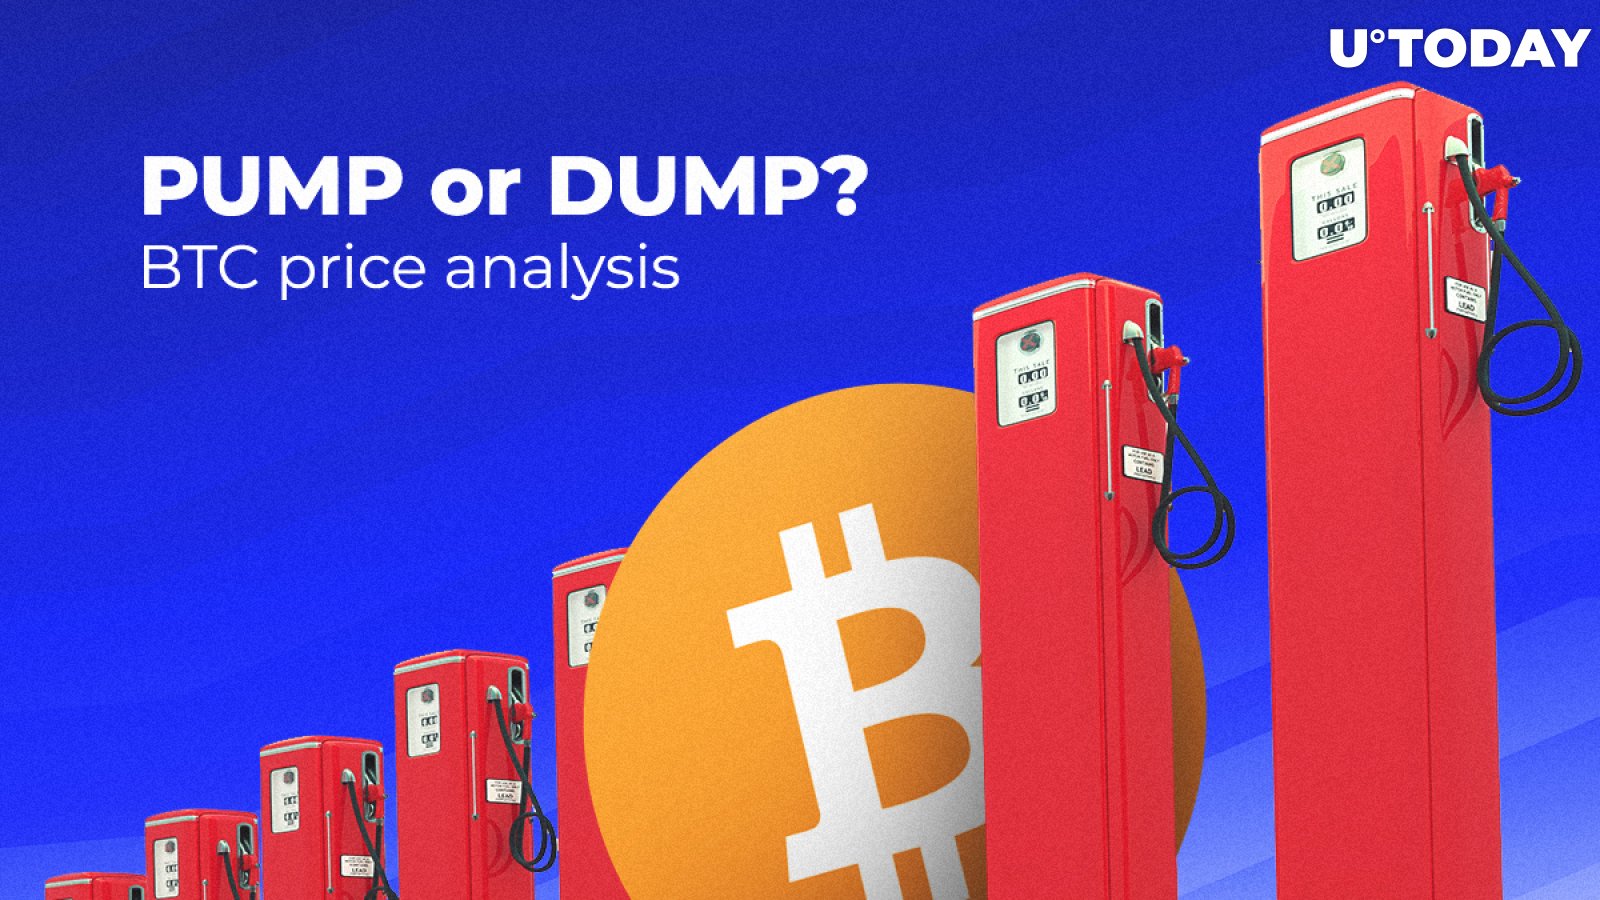 Pump or Dump? BTC Price Analysis Is Interpreted in Two Opposite Versions